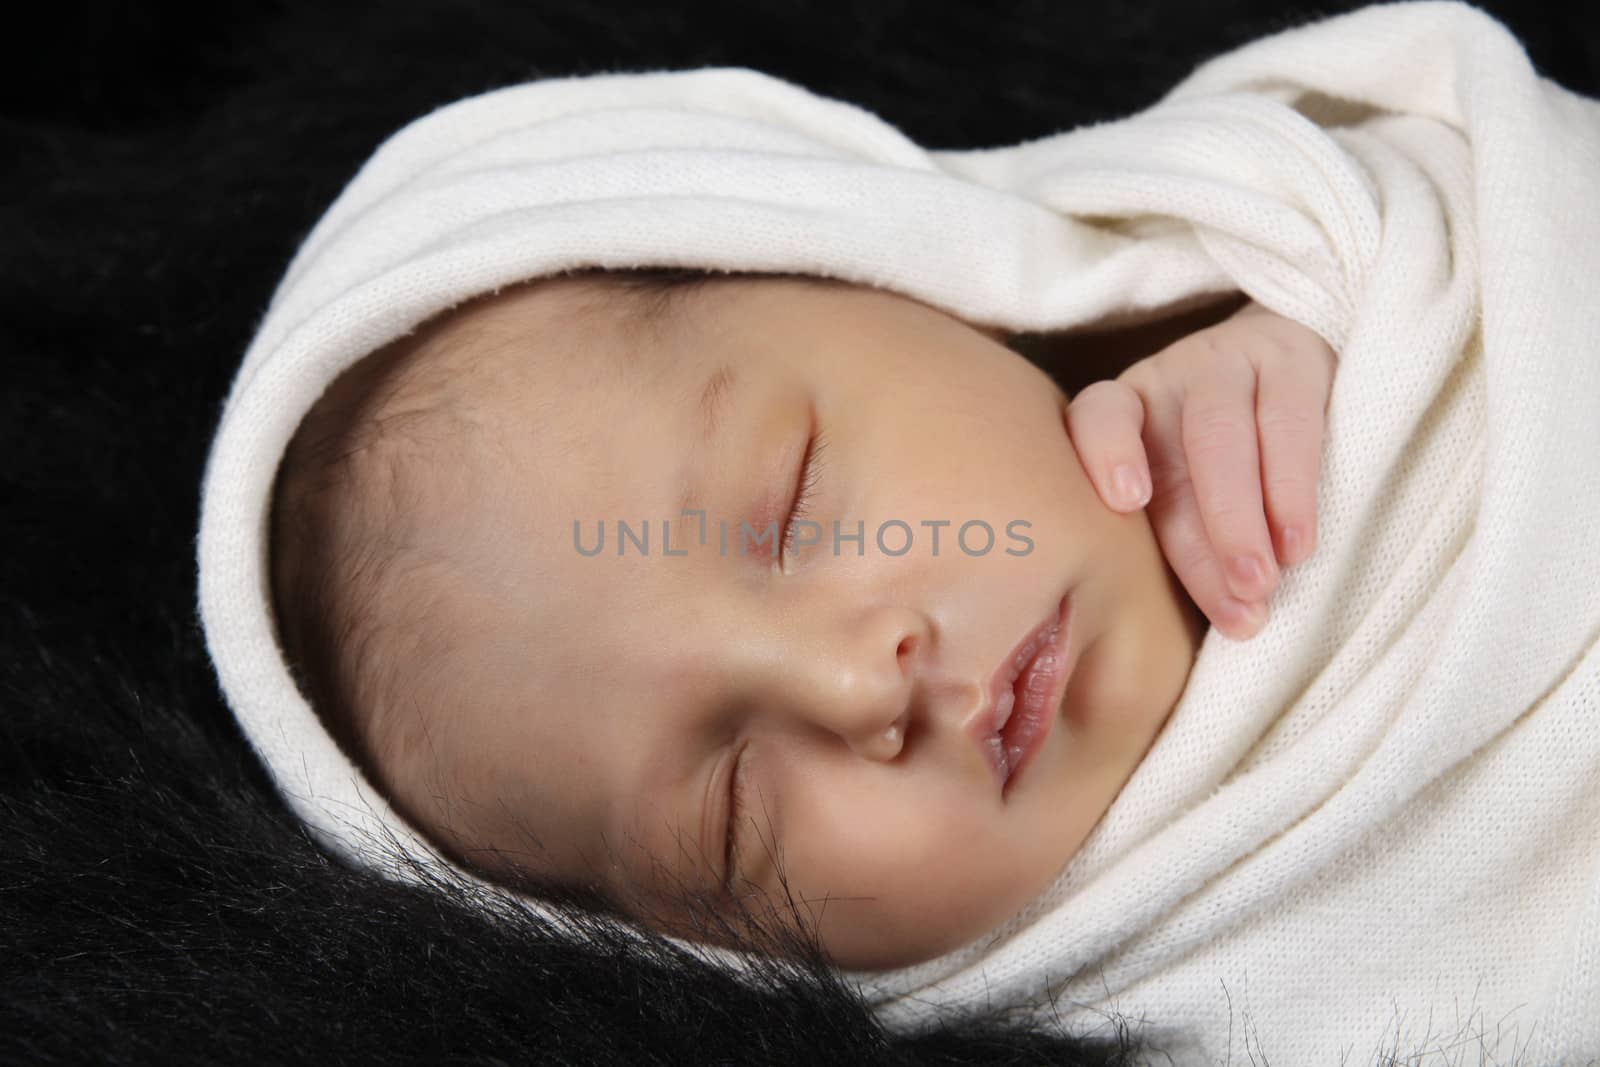 Sleeping baby girl wrapped in cloth against black